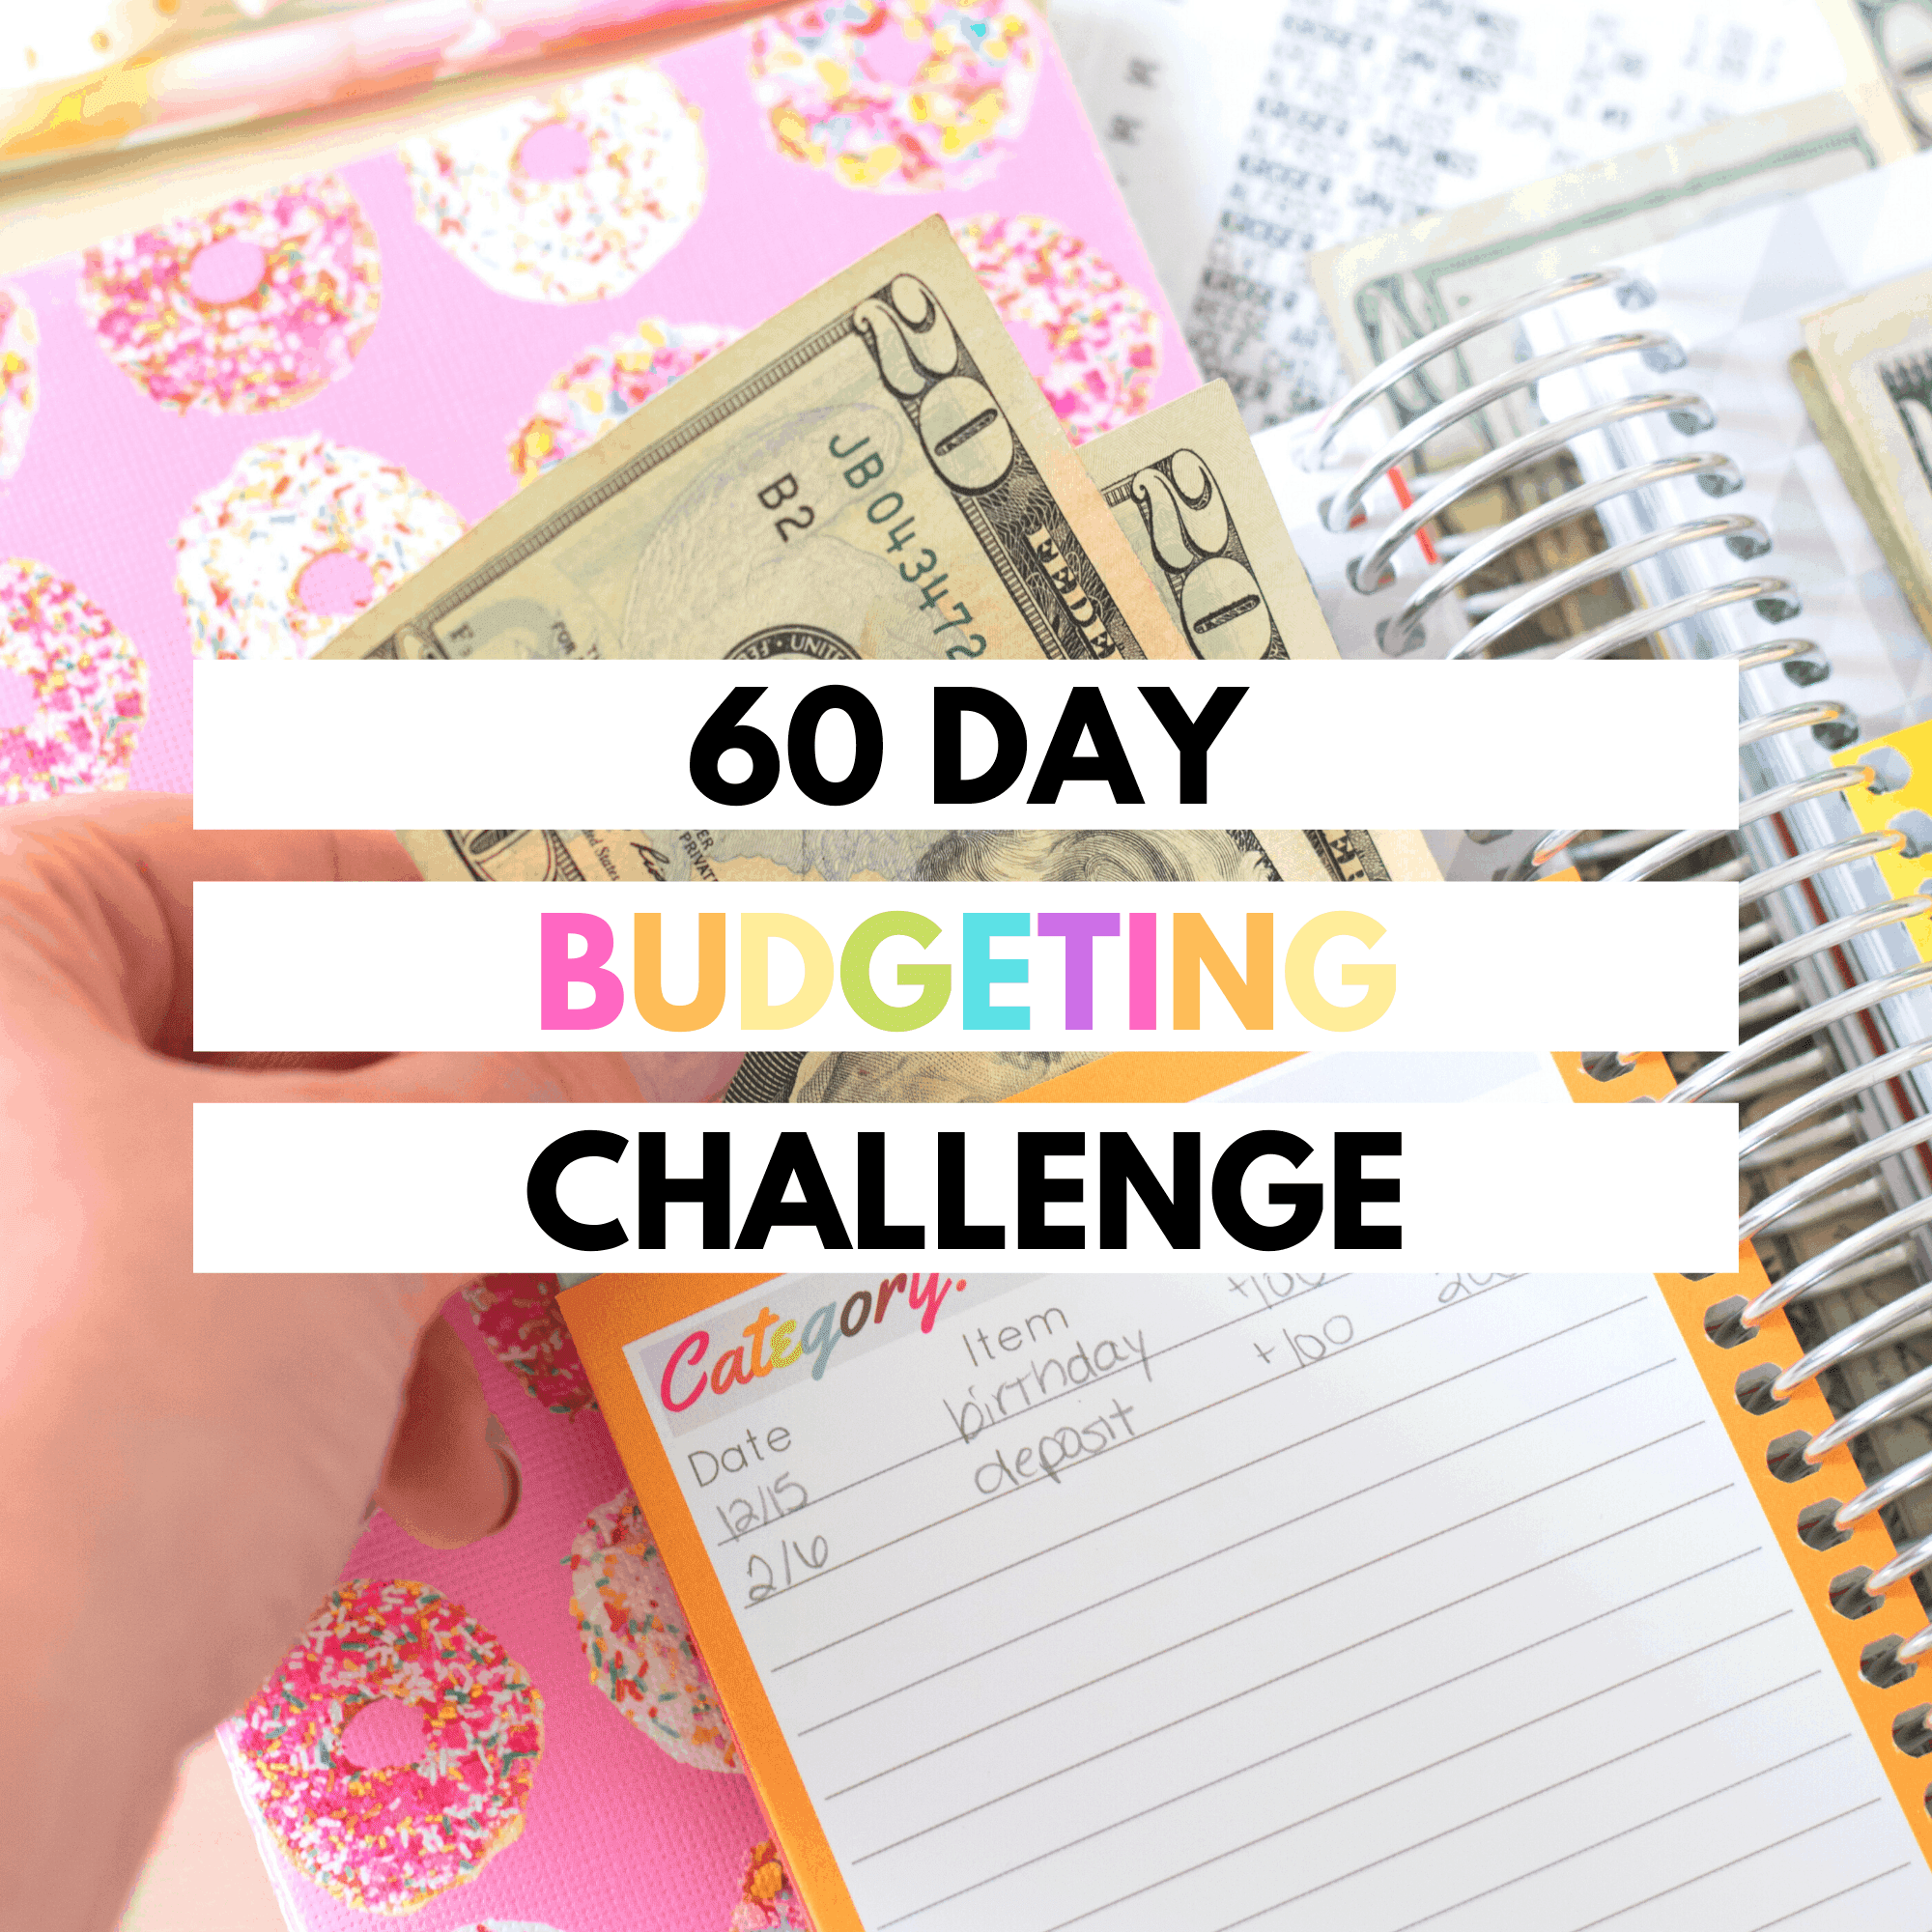 60 Day Budgeting Challenge – Sign Up Here!